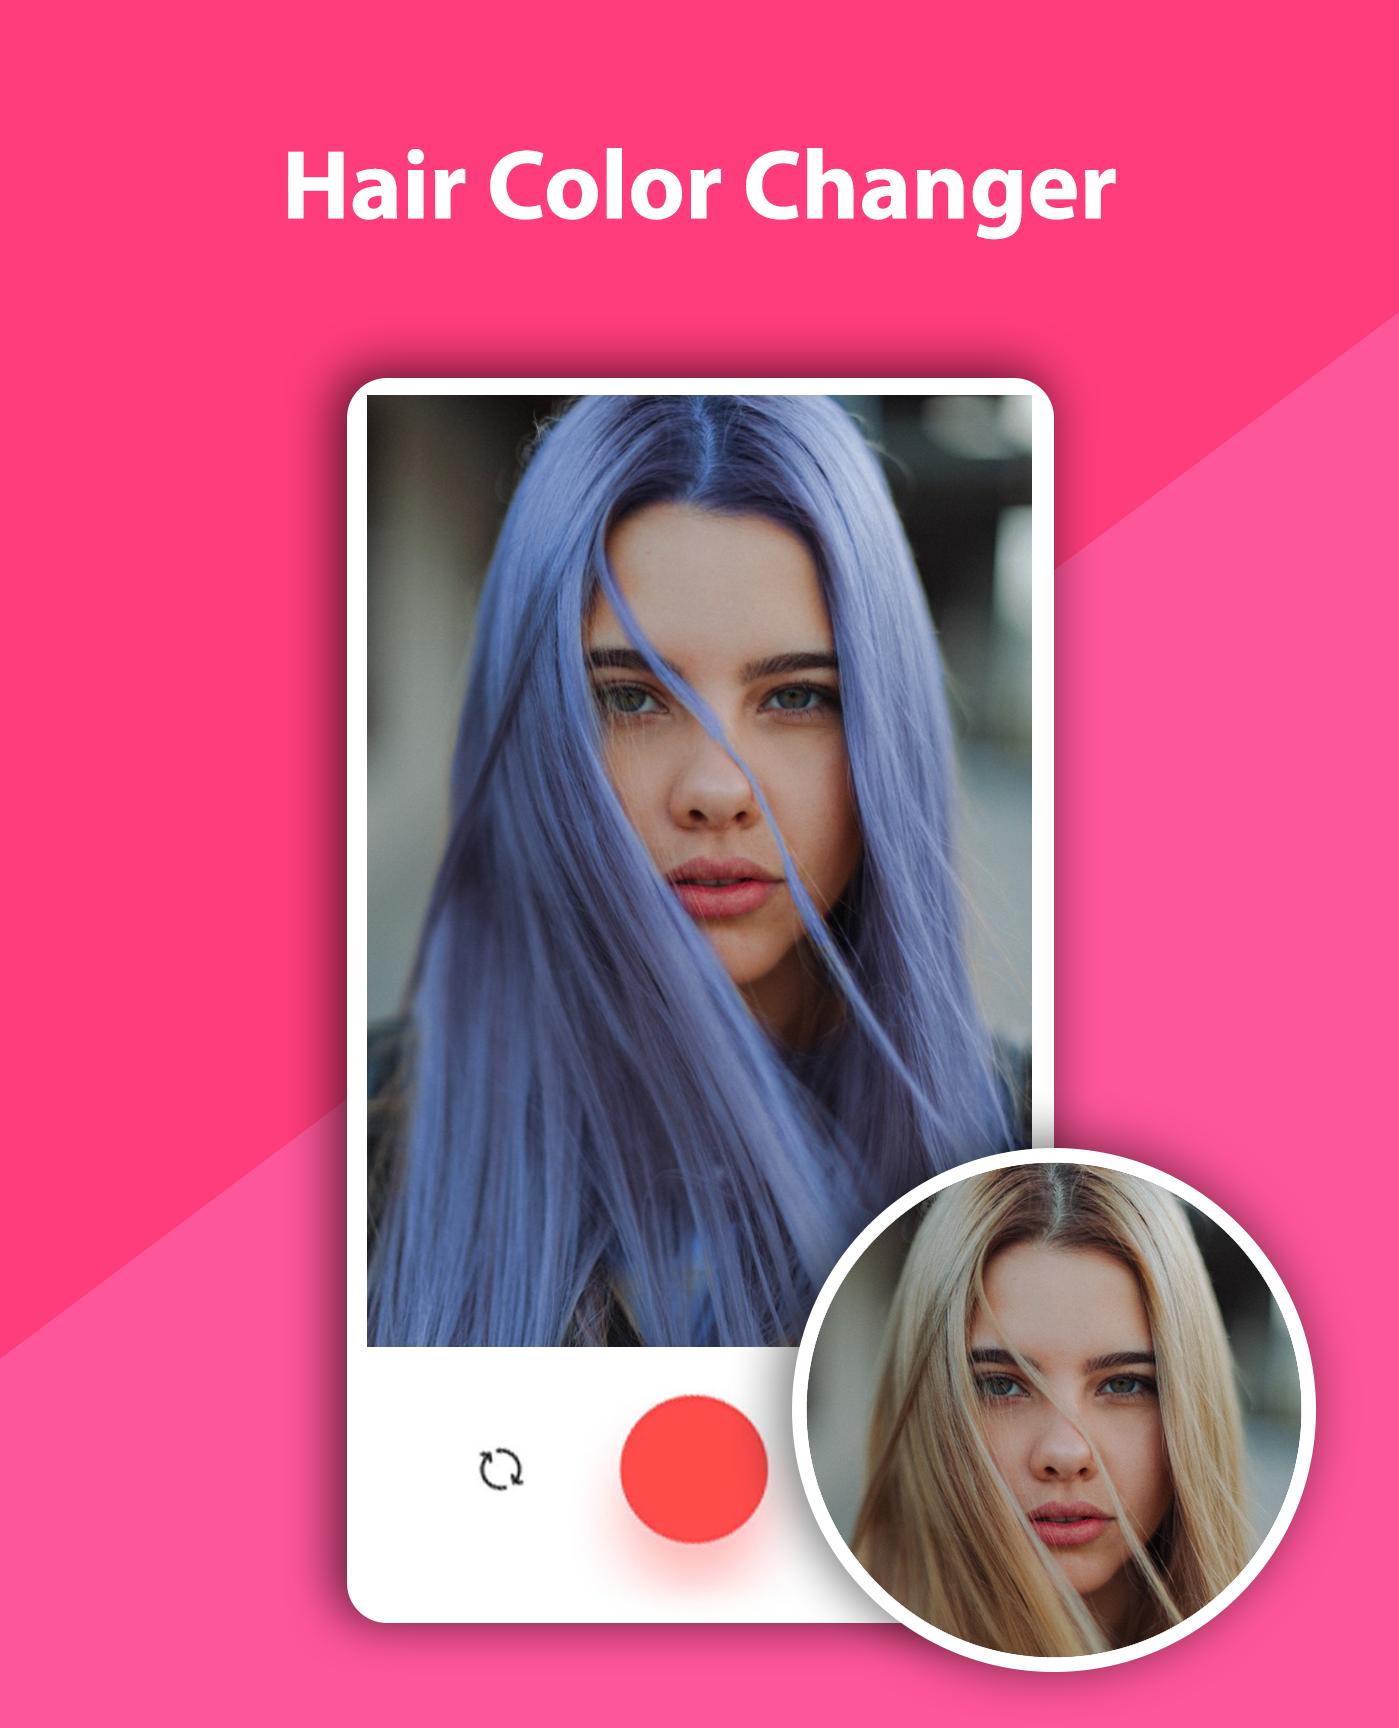 Hair color changer - Try different hair colors 1.0.0 Screenshot 3